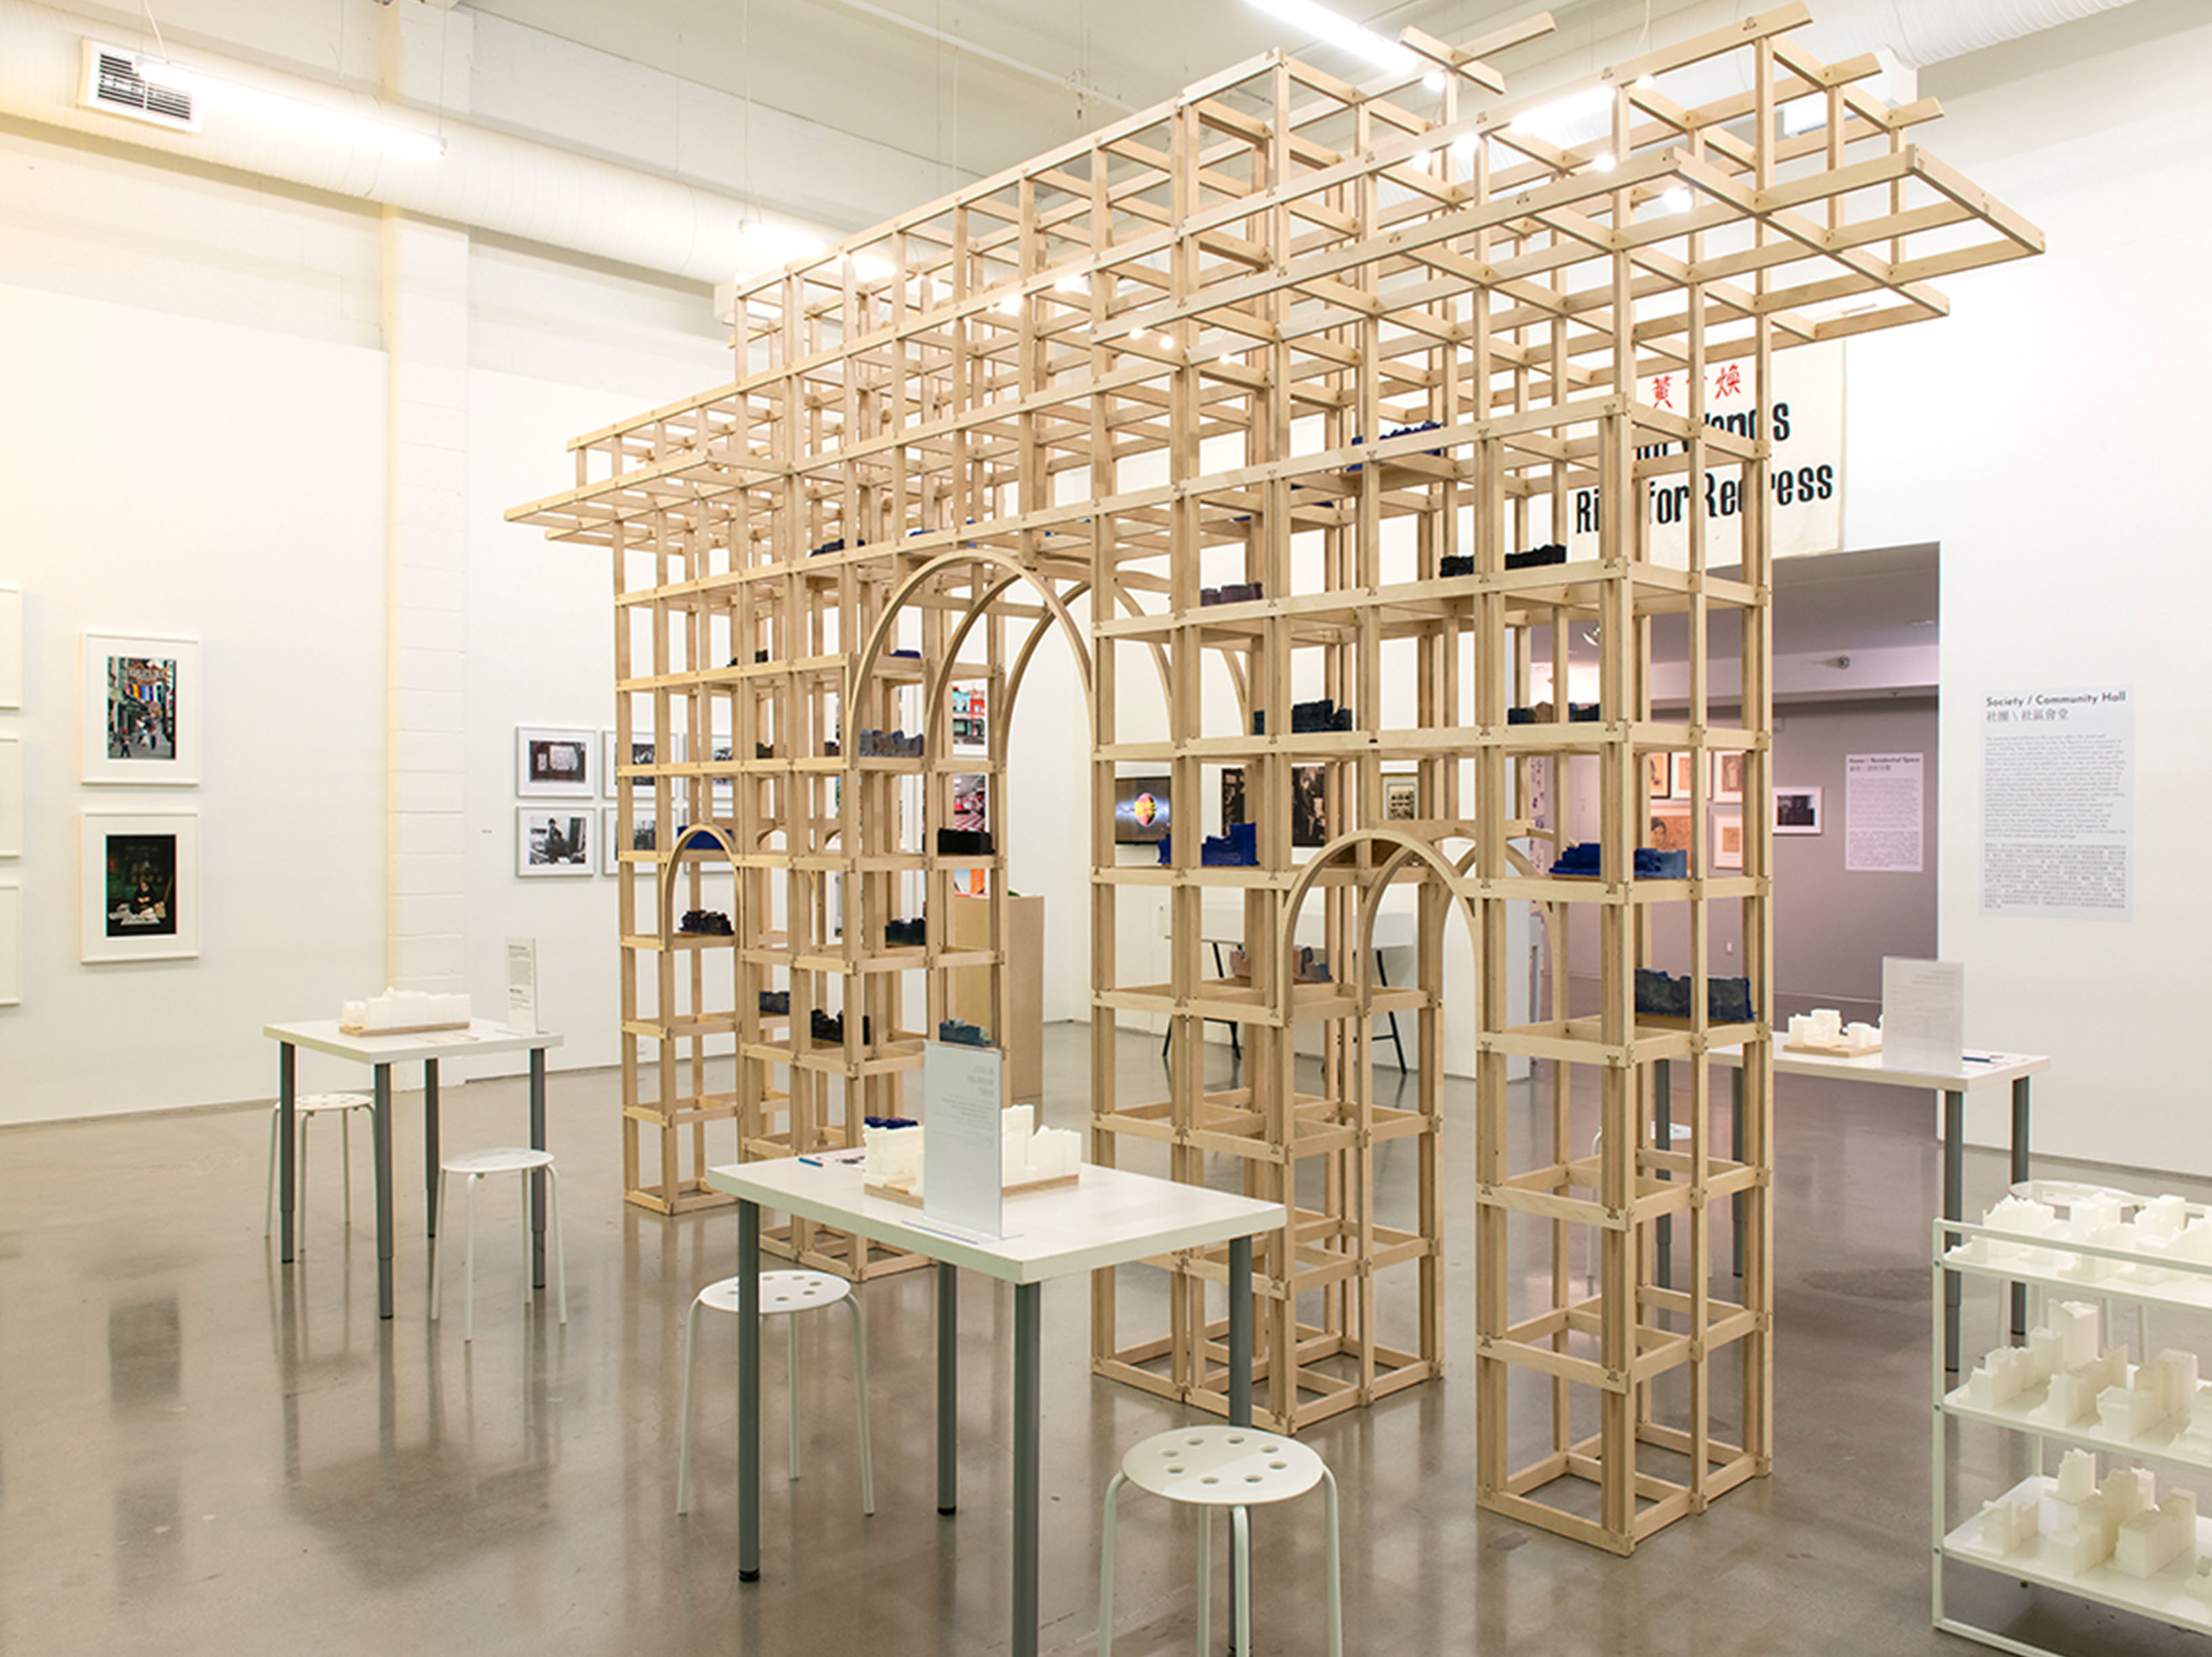 A gallery space with several objects on display. There is a wooden scaffold-looking structure, a tiered cart of small white objects, white tables with white stools and more white objects, and an adjacent room had framed art on the walls.